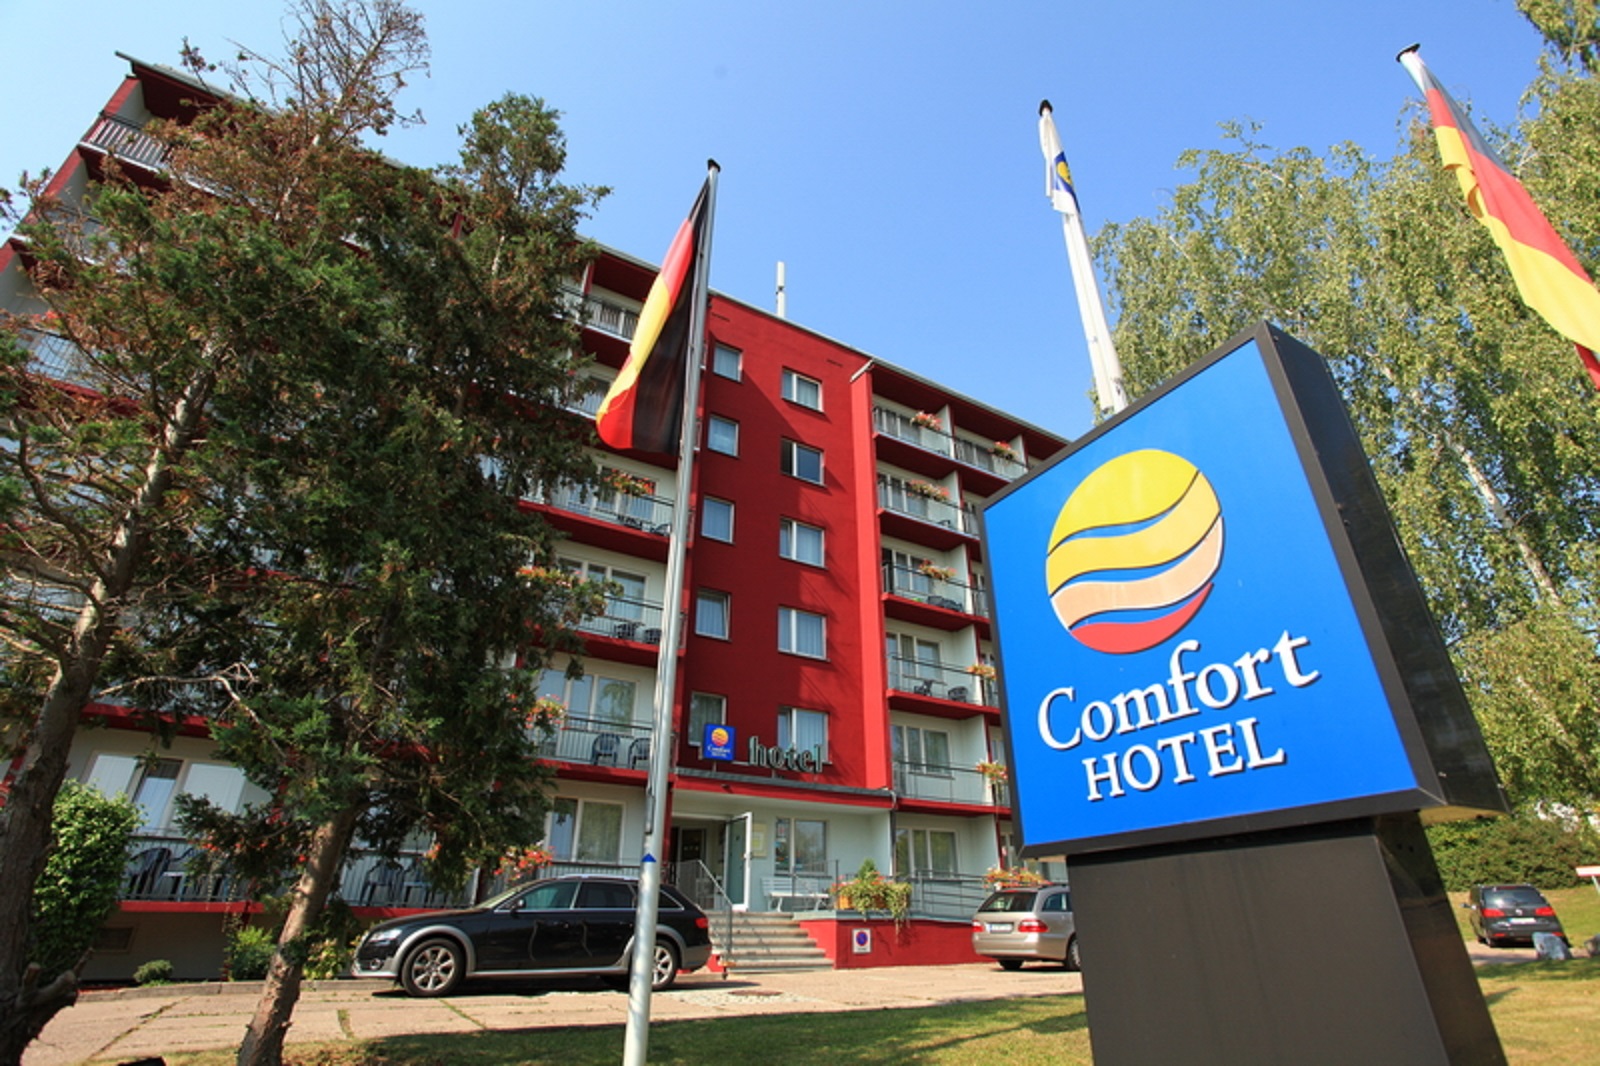 Comfort Hotel Weimar <br/>49.00 ew <br/> <a href='http://vakantieoplossing.nl/outpage/?id=fbb557c2017e8e53757093d50a72142c' target='_blank'>View Details</a>